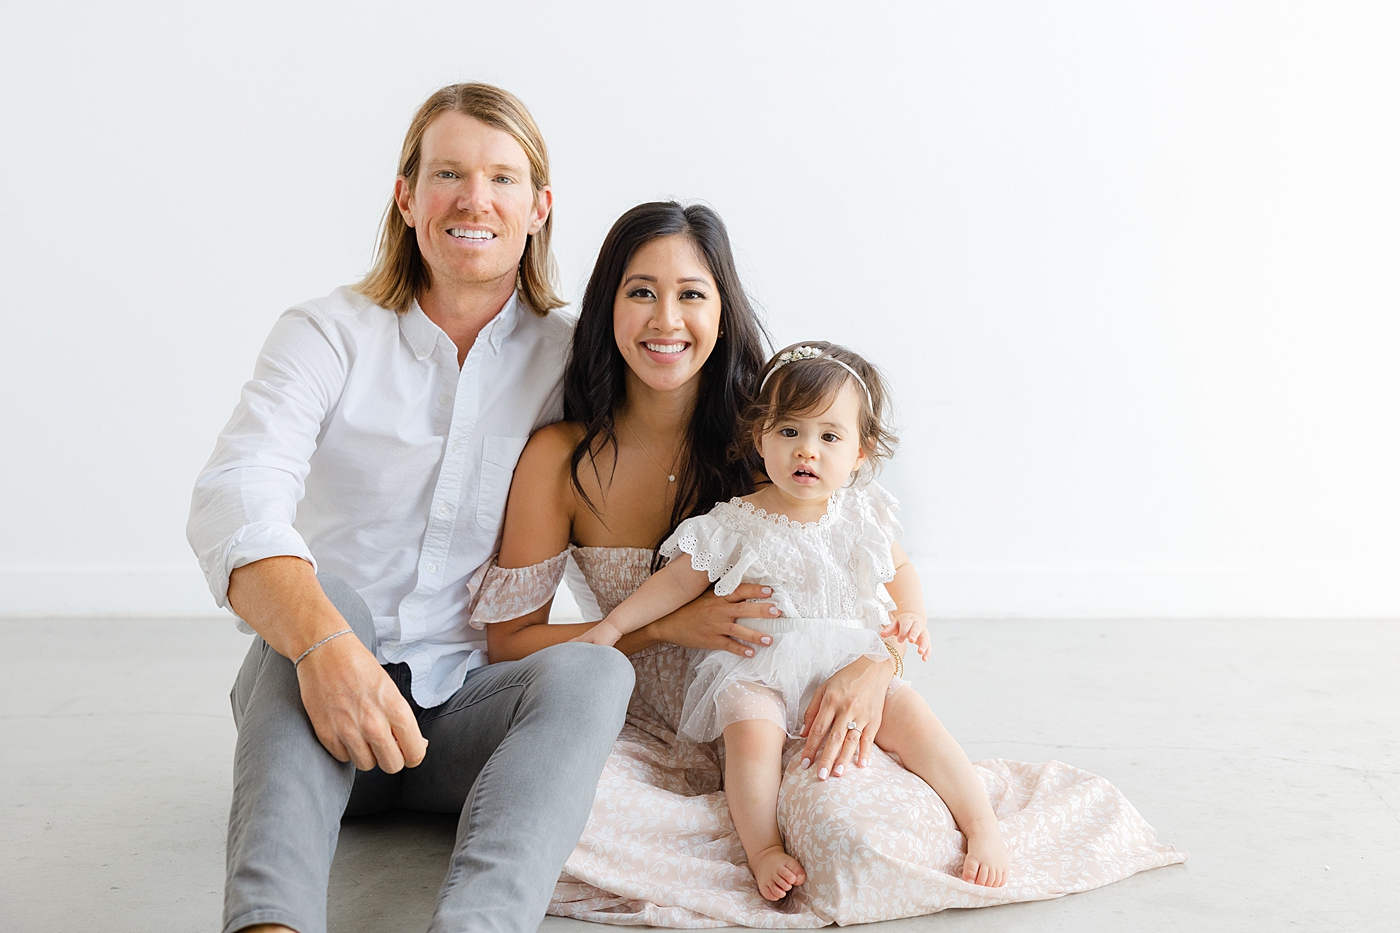 Mom and dad sitting on the floor with their baby girl during her one year studio milestone session| Image by Sana Ahmed Photography